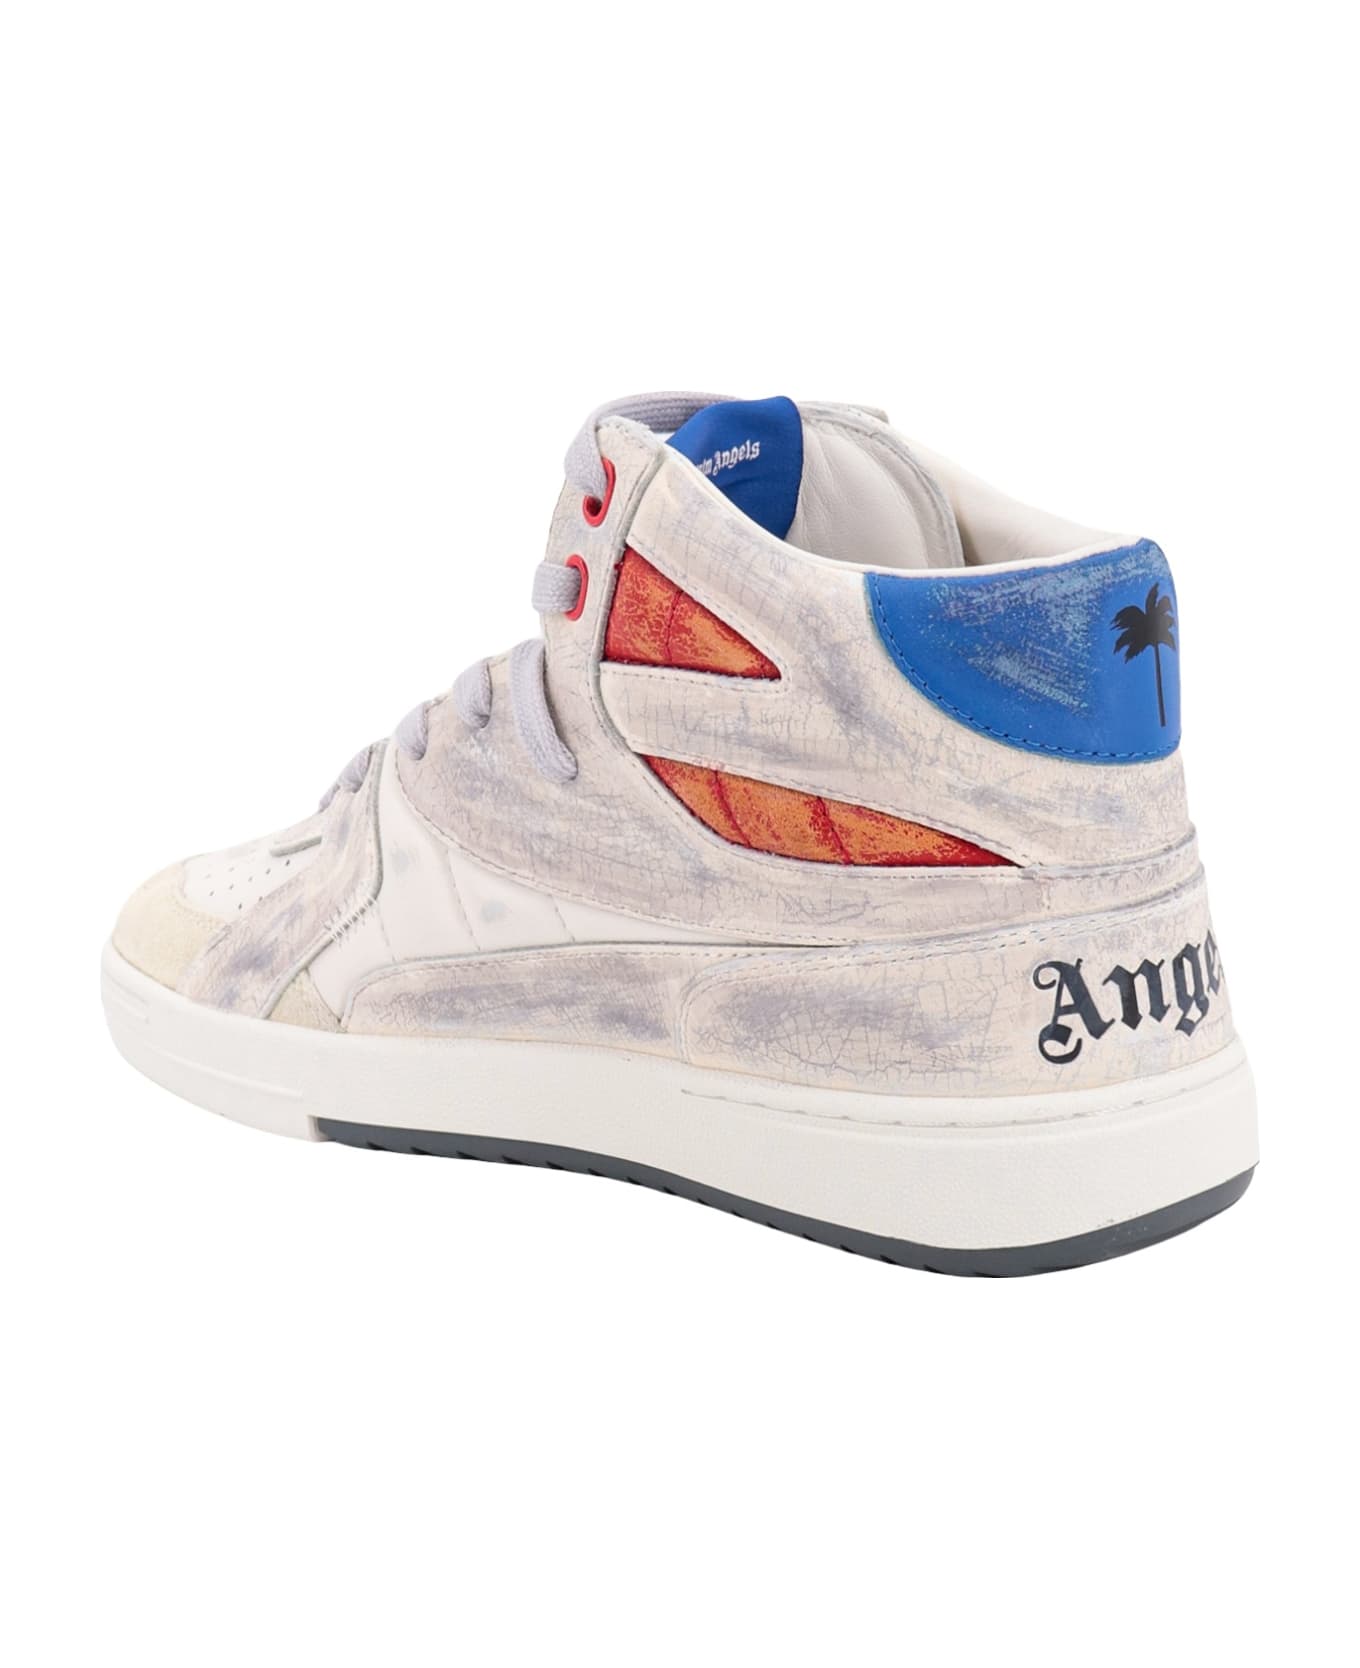 Palm Angels Multicolor University Leather Sneakers - White スニーカー